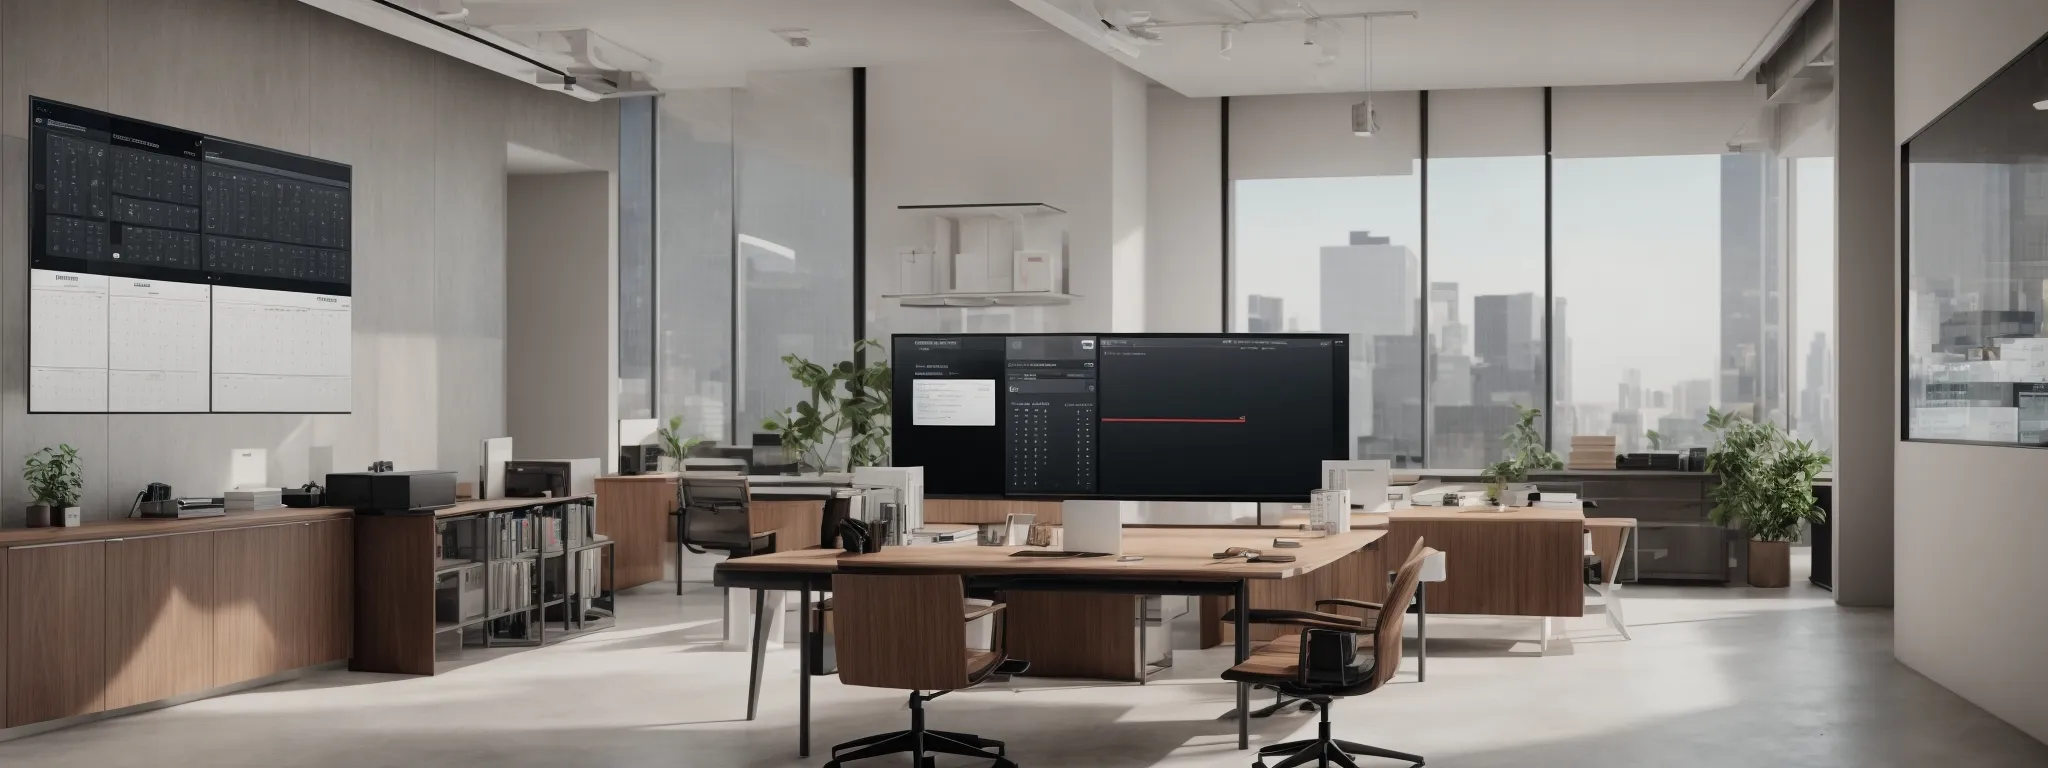 a modern office space equipped with a sleek, large-screen monitor displaying an organized calendar interface alongside a video conferencing application.